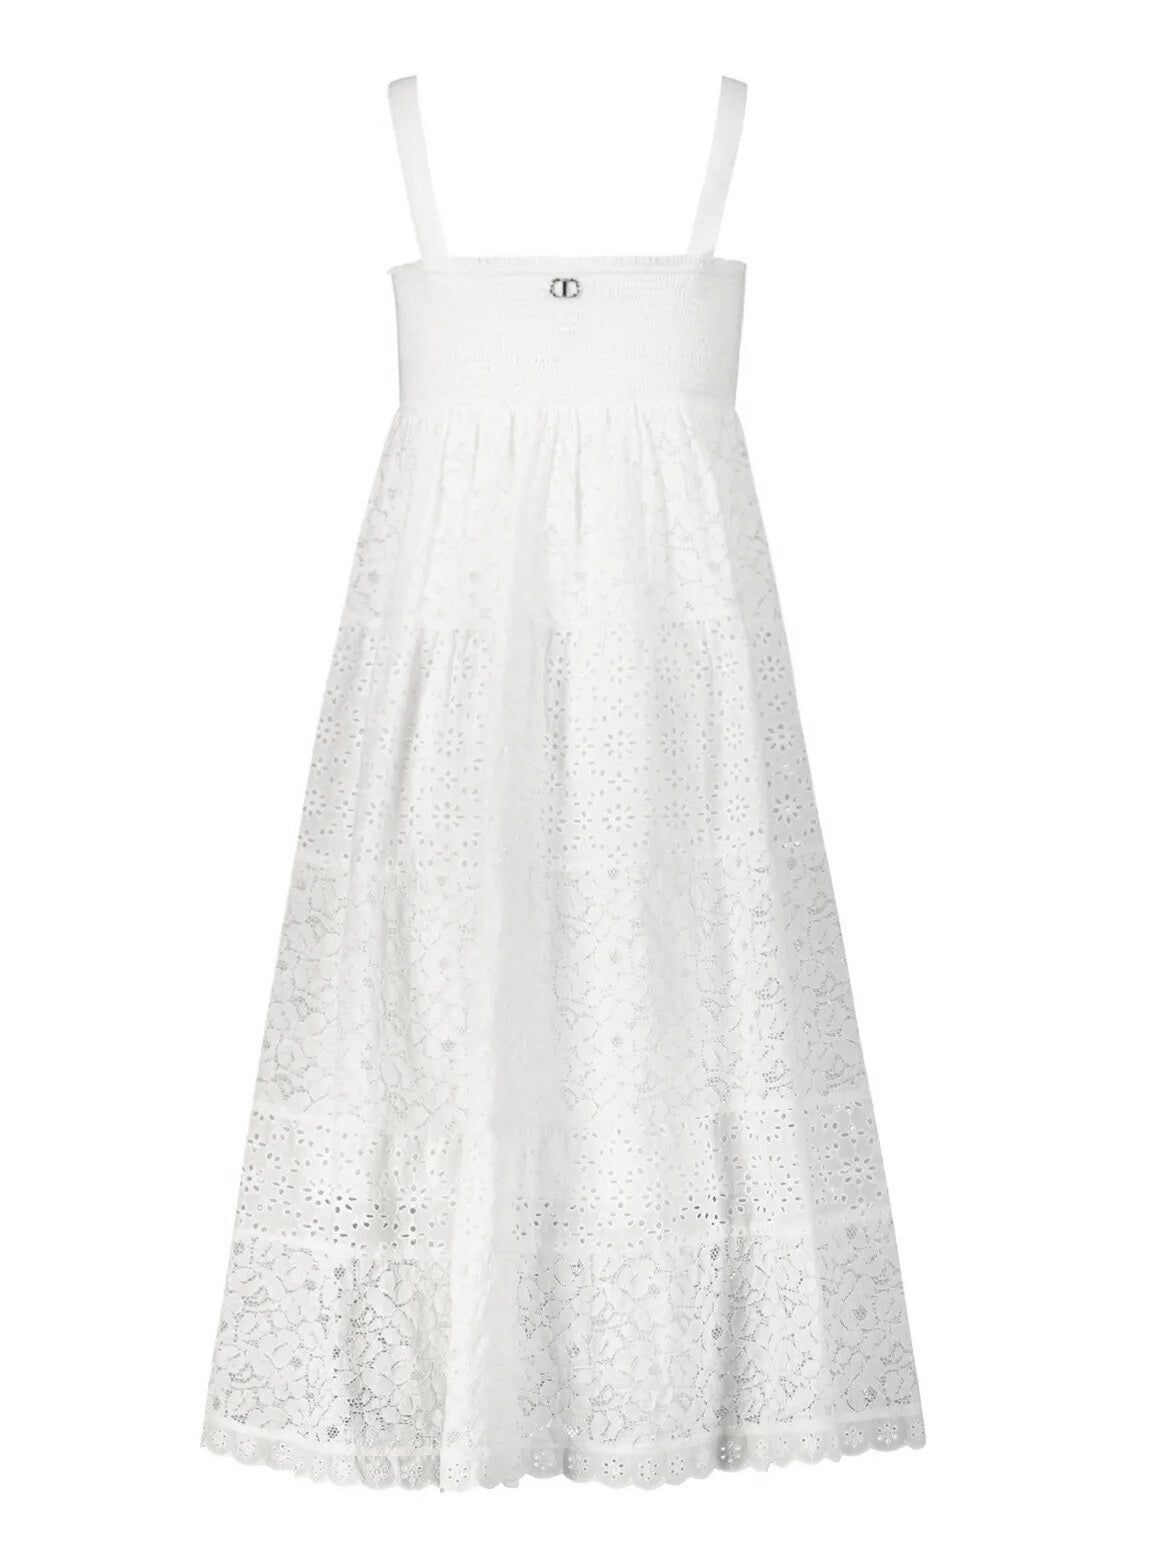 Twinset-girls' lace dress with straps